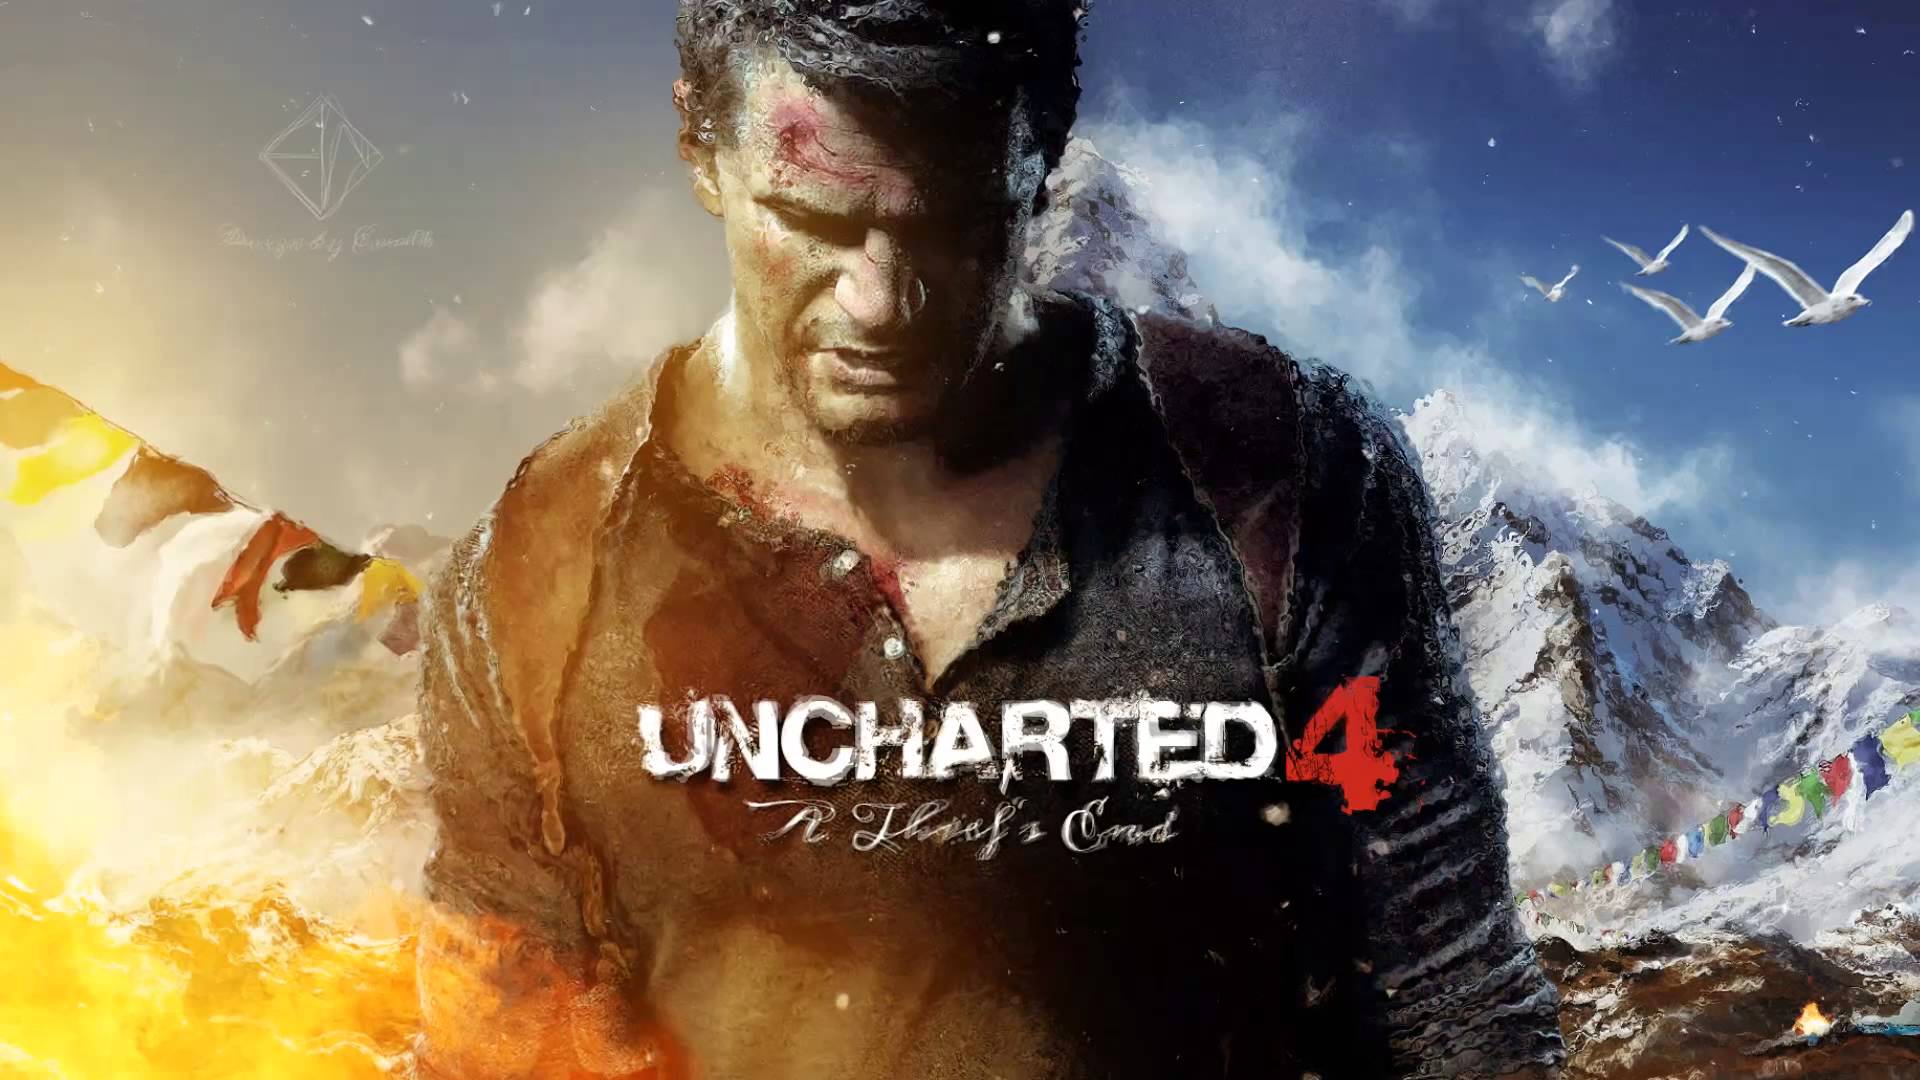 Wallpaper  1920x1080 px game in mountains Uncharted 4 A Thiefs End  wilderness 1920x1080  4kWallpaper  1398563  HD Wallpapers  WallHere